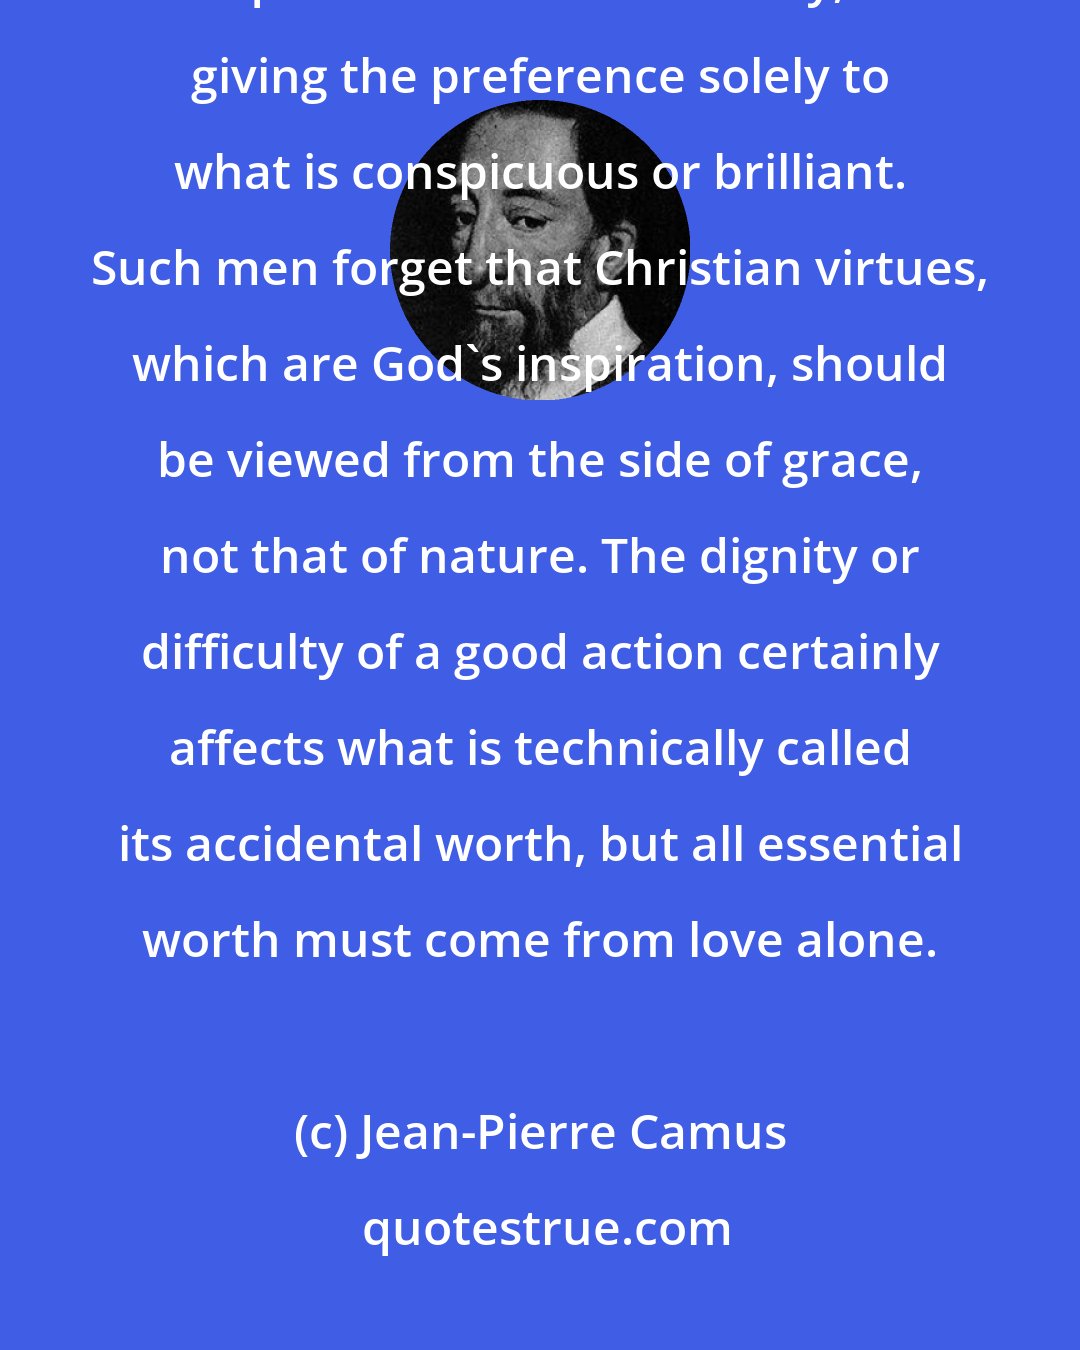 Jean-Pierre Camus: Some people measure the worth of good actions only by their natural qualities or their difficulty, giving the preference solely to what is conspicuous or brilliant. Such men forget that Christian virtues, which are God's inspiration, should be viewed from the side of grace, not that of nature. The dignity or difficulty of a good action certainly affects what is technically called its accidental worth, but all essential worth must come from love alone.